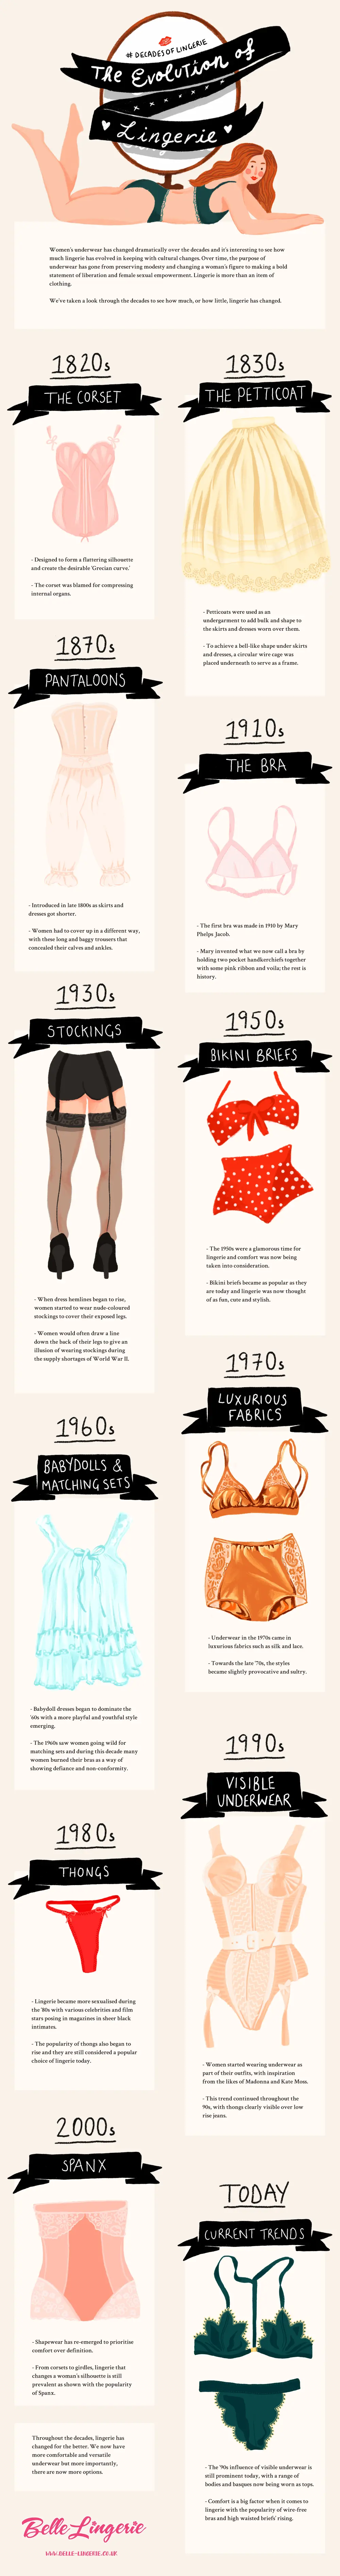 Lingerie Through The Decades: How Underwear Has Evolved.